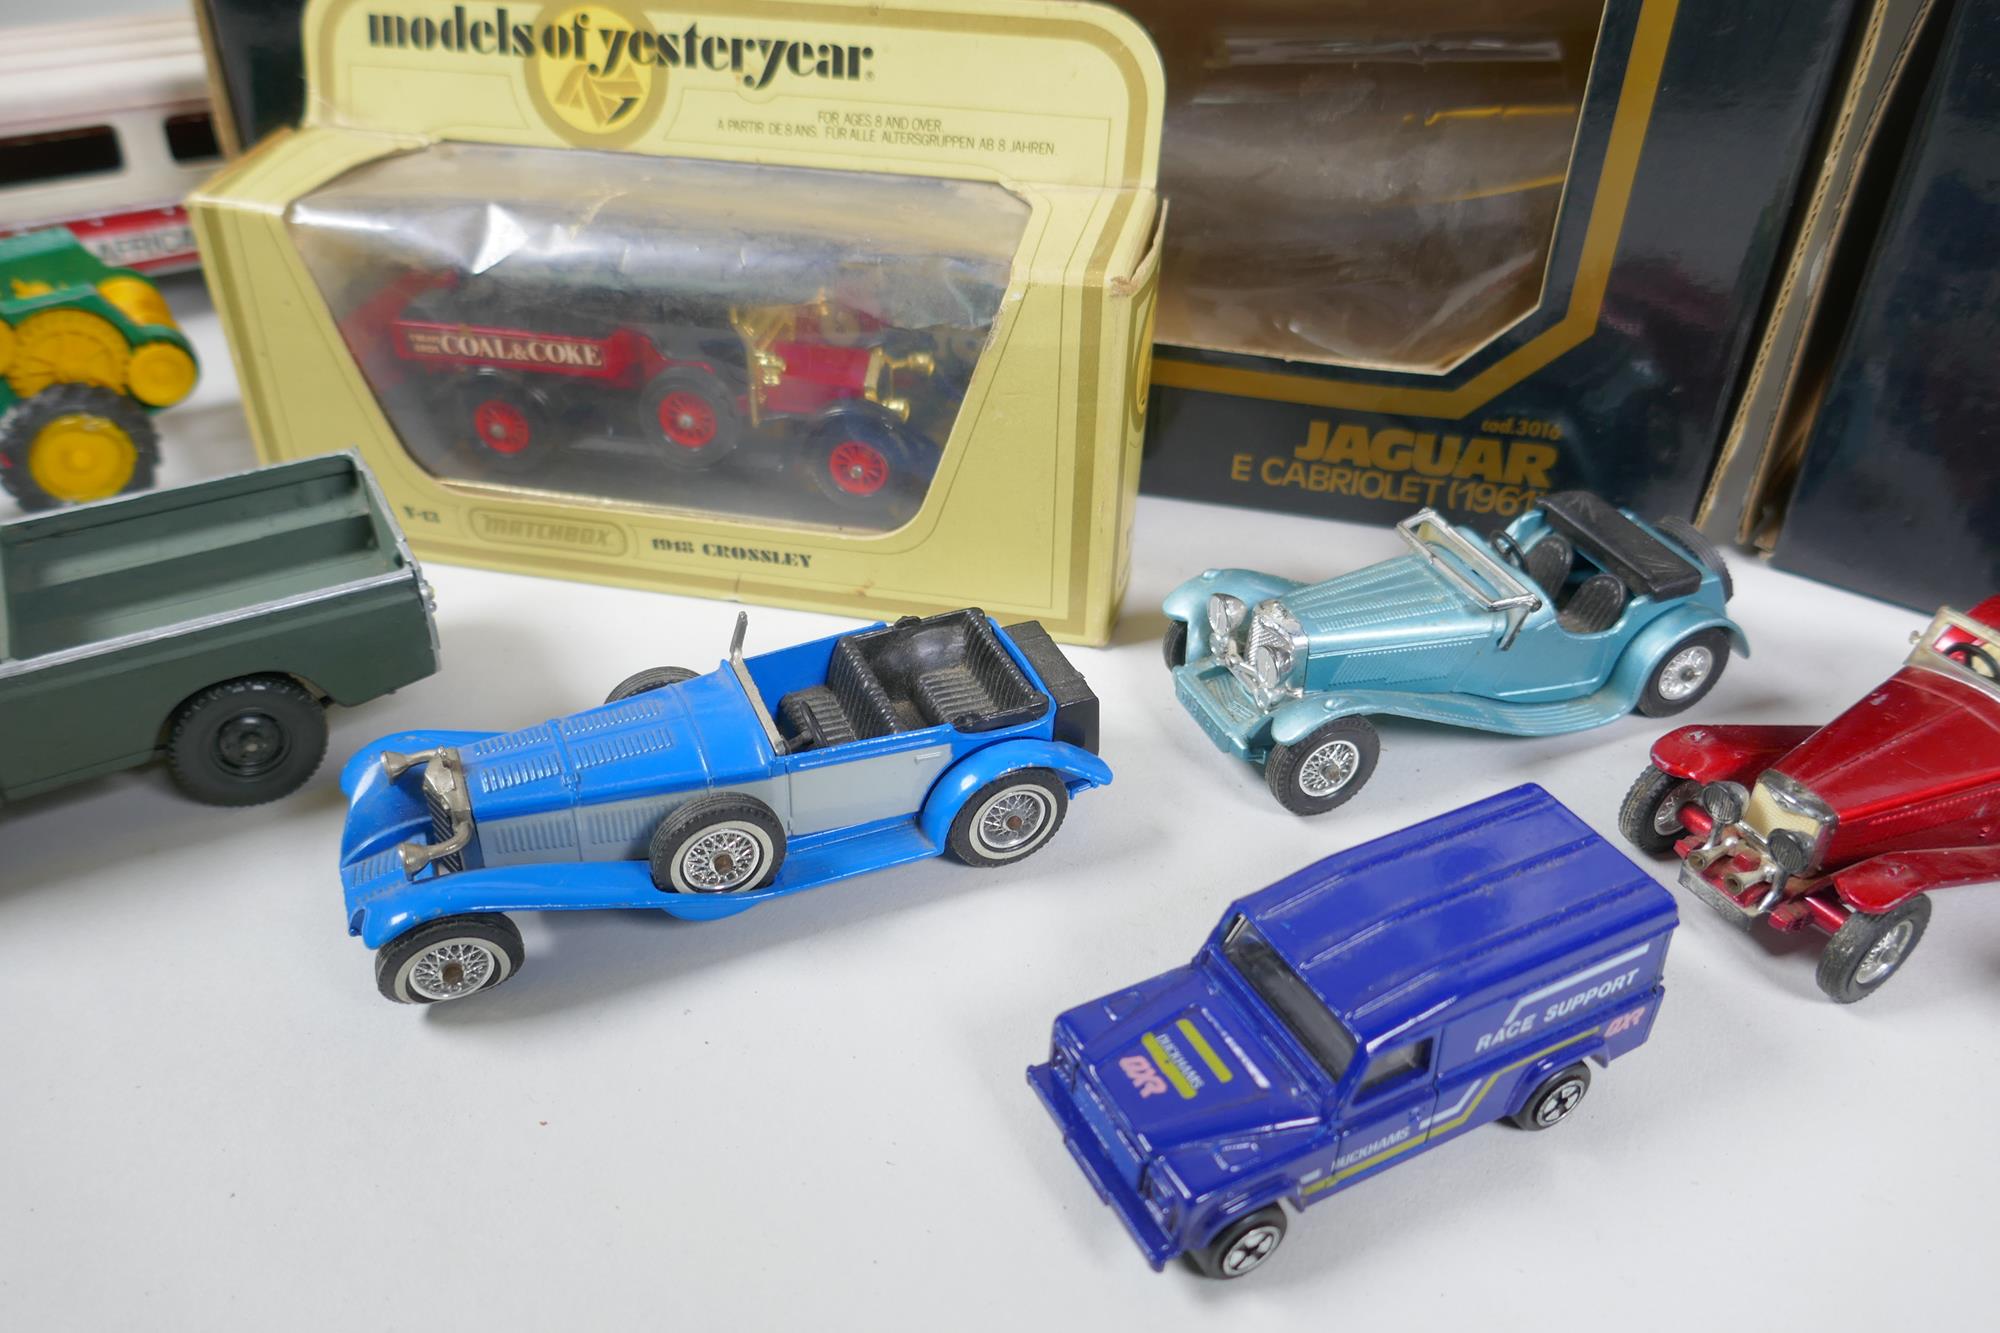 A Bburago 1/18 scale die cast Mercedes Benz SSK (1928) and a Jaguar E. Cabriolet (1961), both in - Image 6 of 8